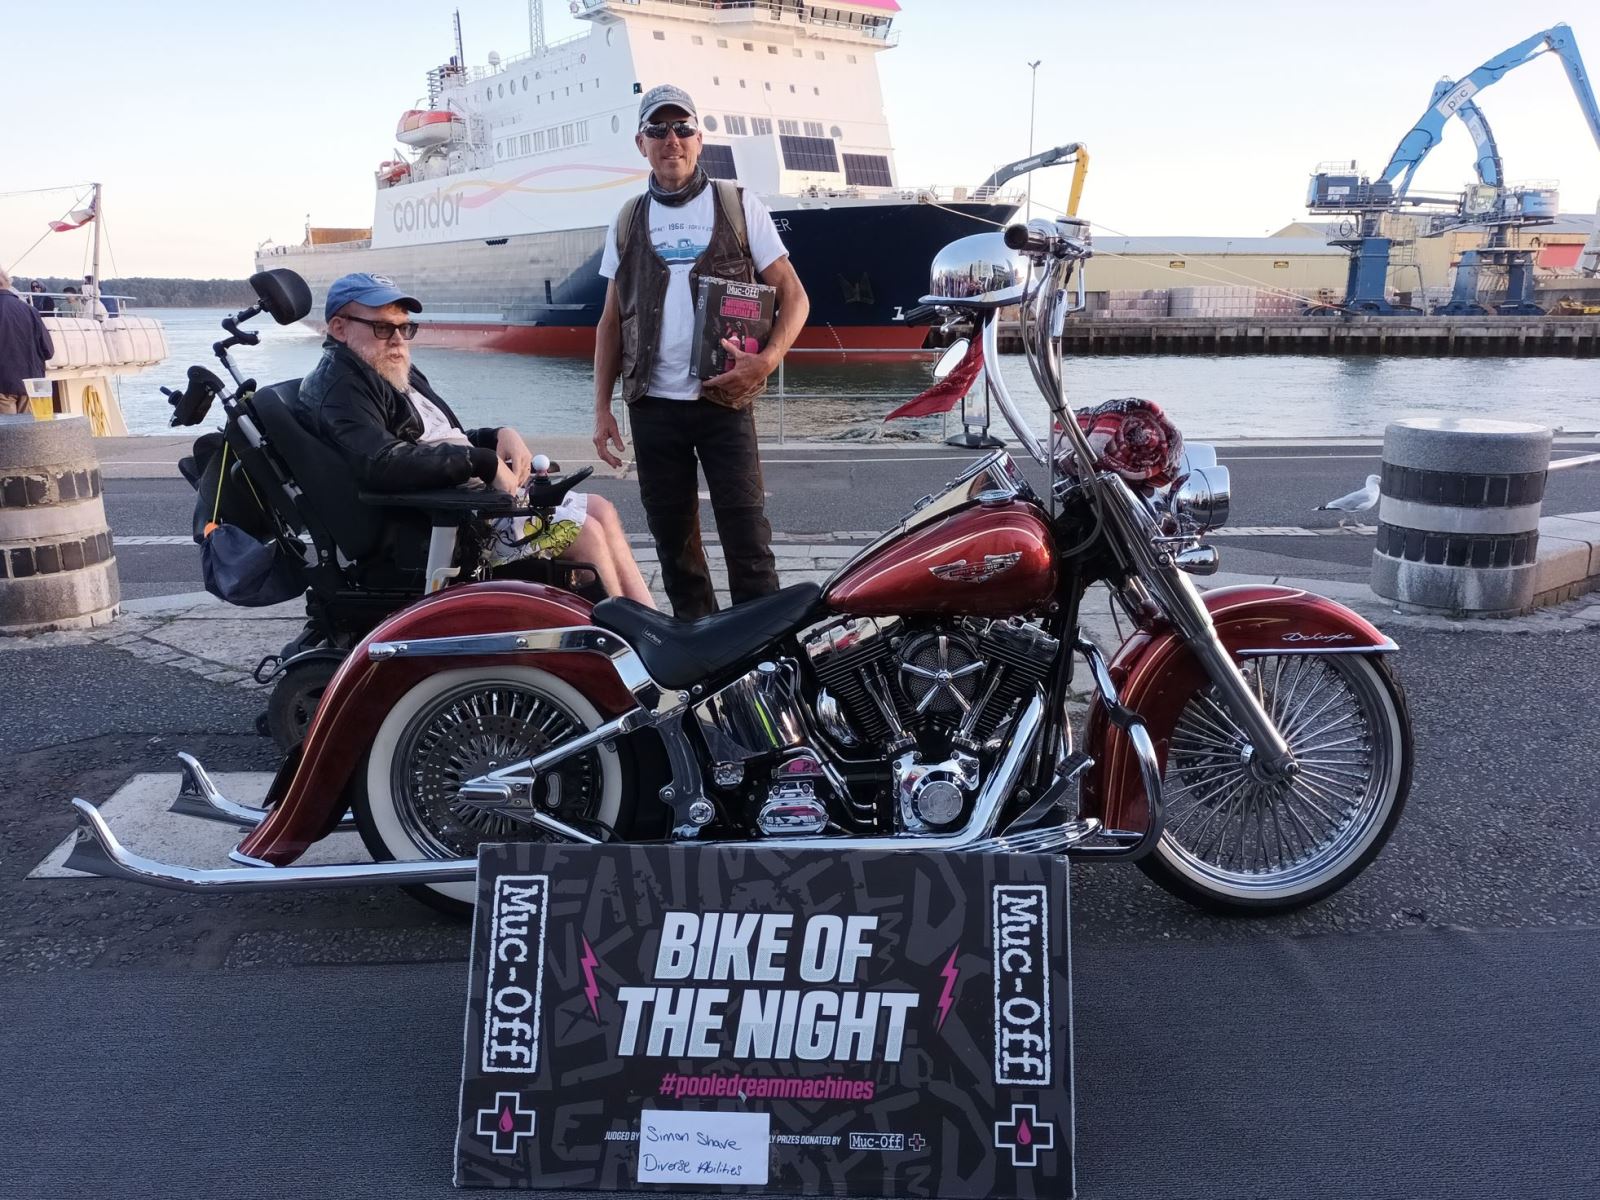 Two men next to the winning bike at Poole Quay